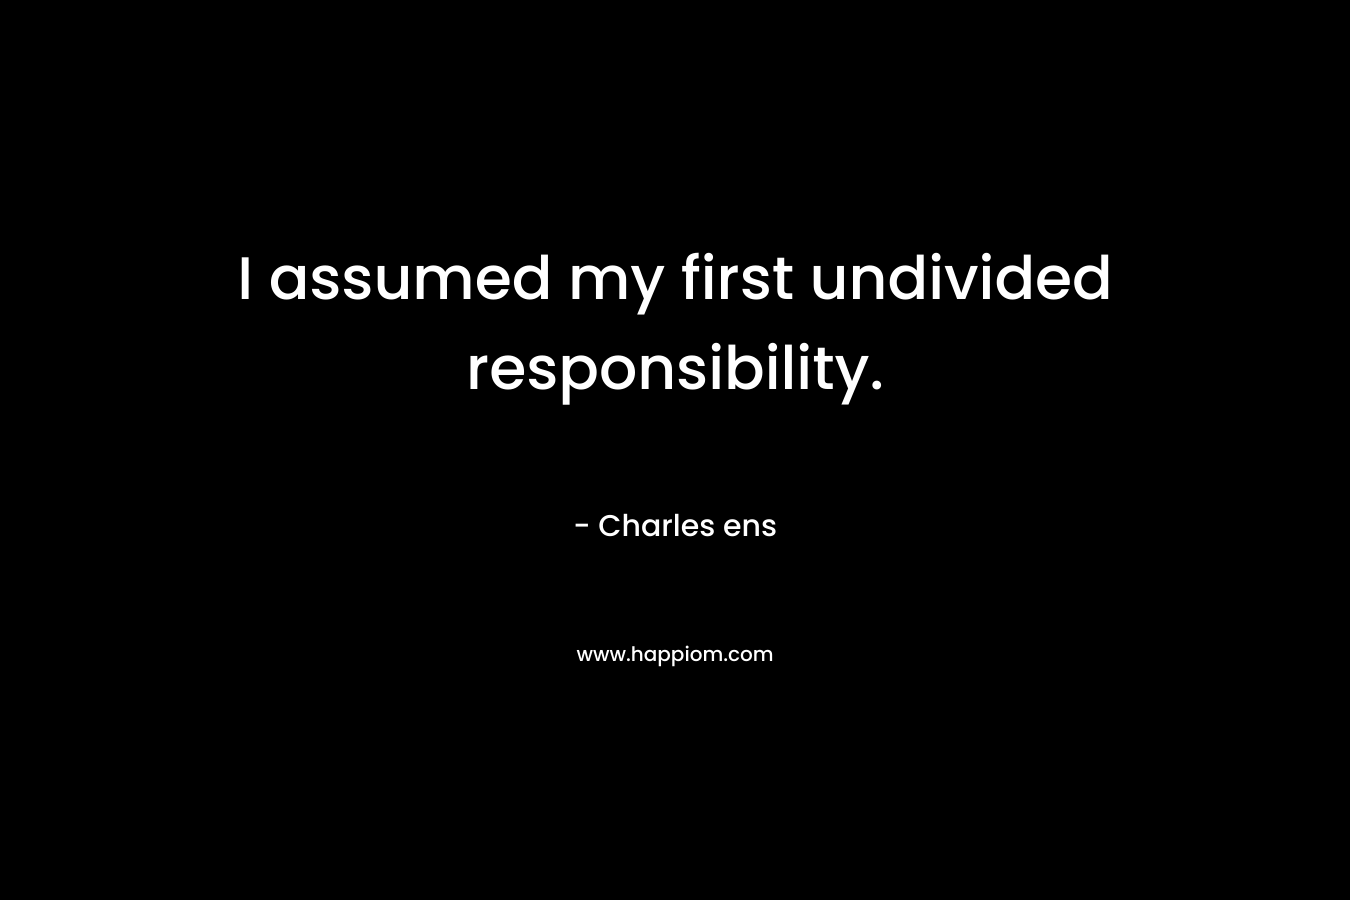 I assumed my first undivided responsibility.